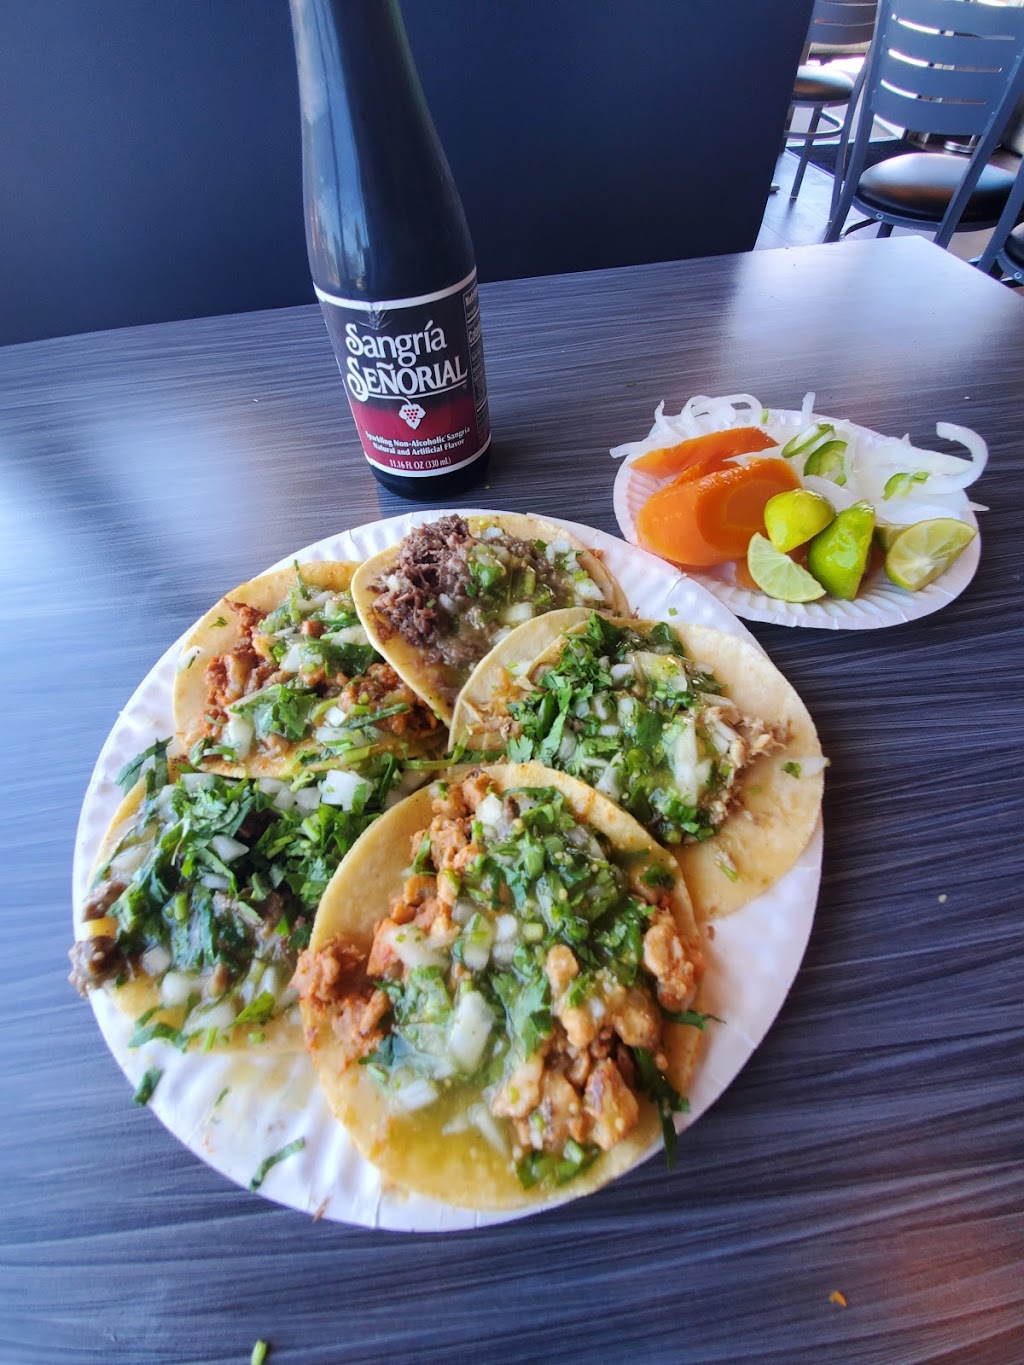 Tacos El Rancho | 13698 Goldenwest St # A, Westminster, CA 92683, USA | Phone: (714) 898-2720